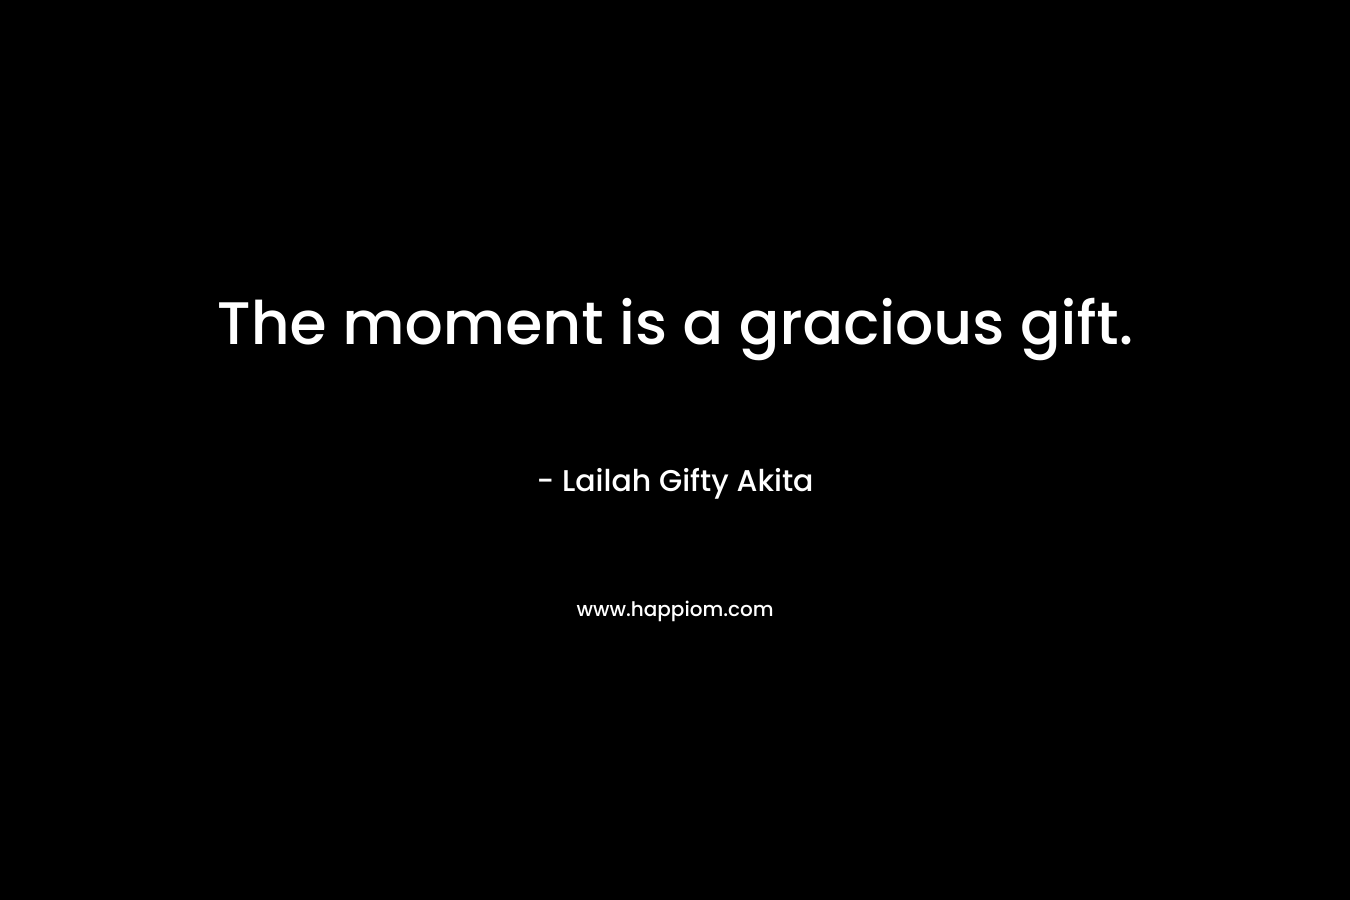 The moment is a gracious gift.